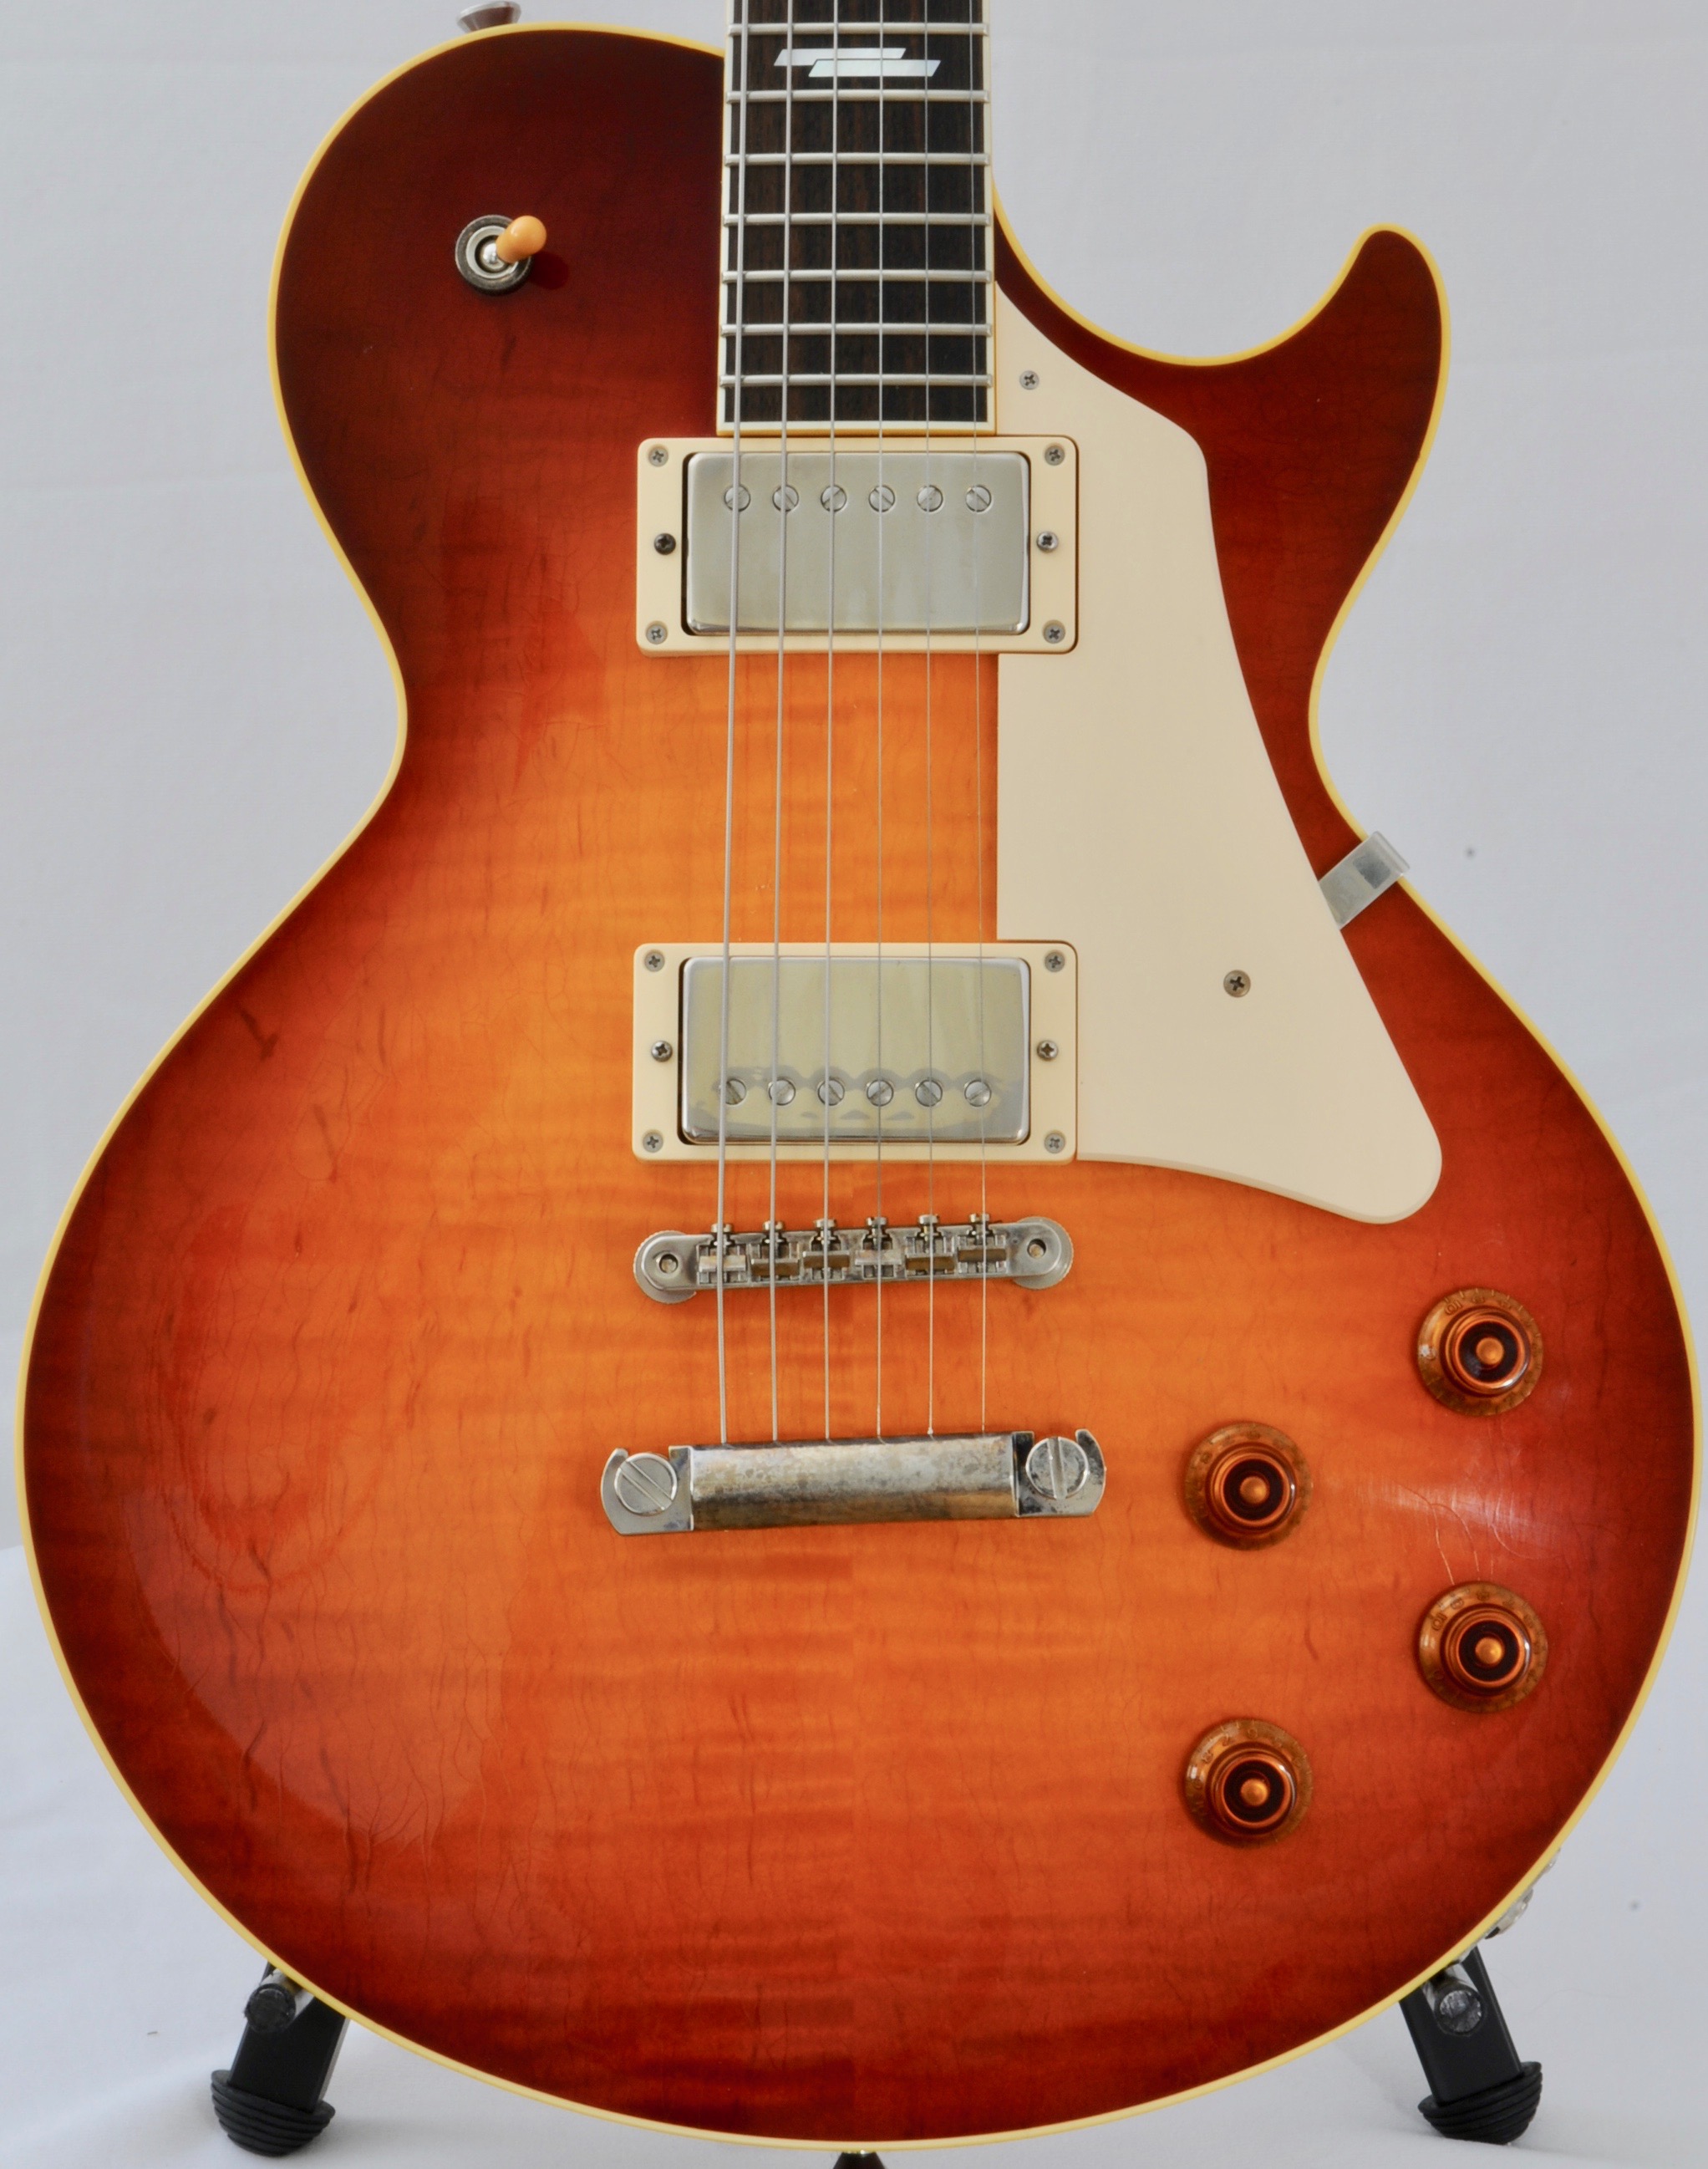 2017 Collings CL with Deluxe Features: Throbak / Inlay / Aging